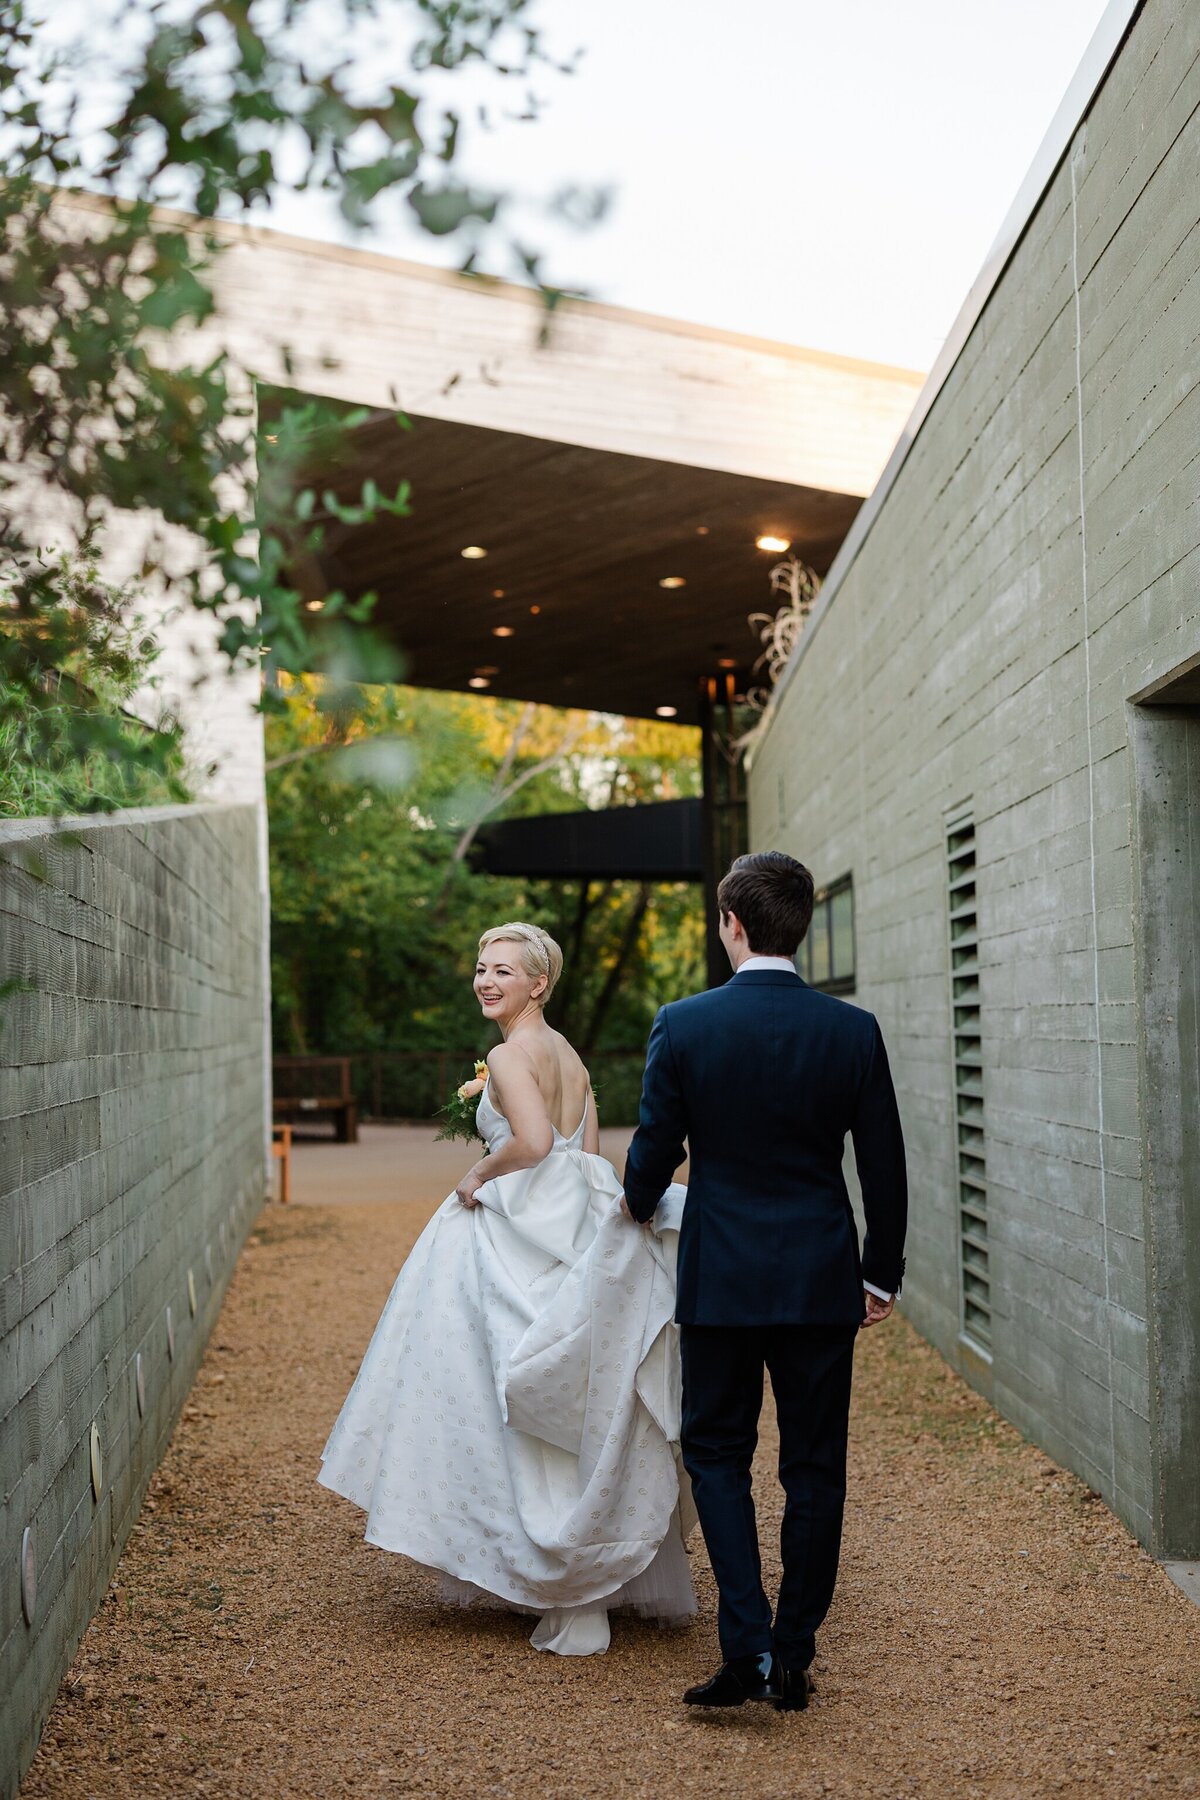 A portrait of a bride and groom walking away from the camera on their wedding day at the Trinity River Audubon Center in Dallas, Texas. The bride is on the left and is looking back at the camera. She wears a long, flowing, short sleeve white dress. The groom is on the right and is wearing a navy suit.